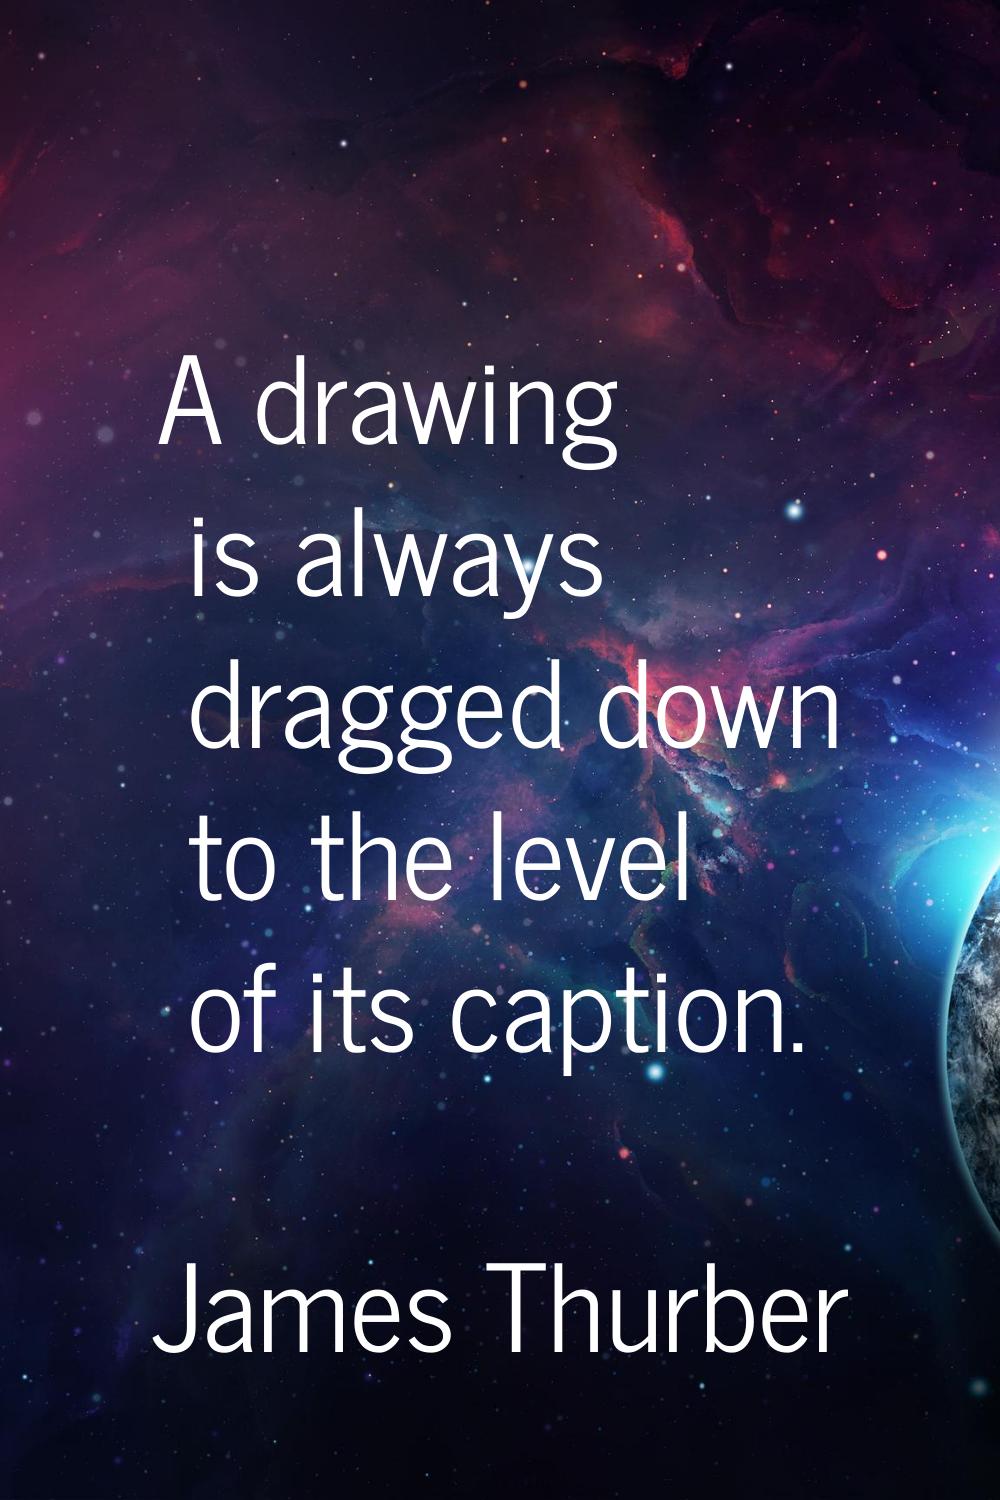 A drawing is always dragged down to the level of its caption.